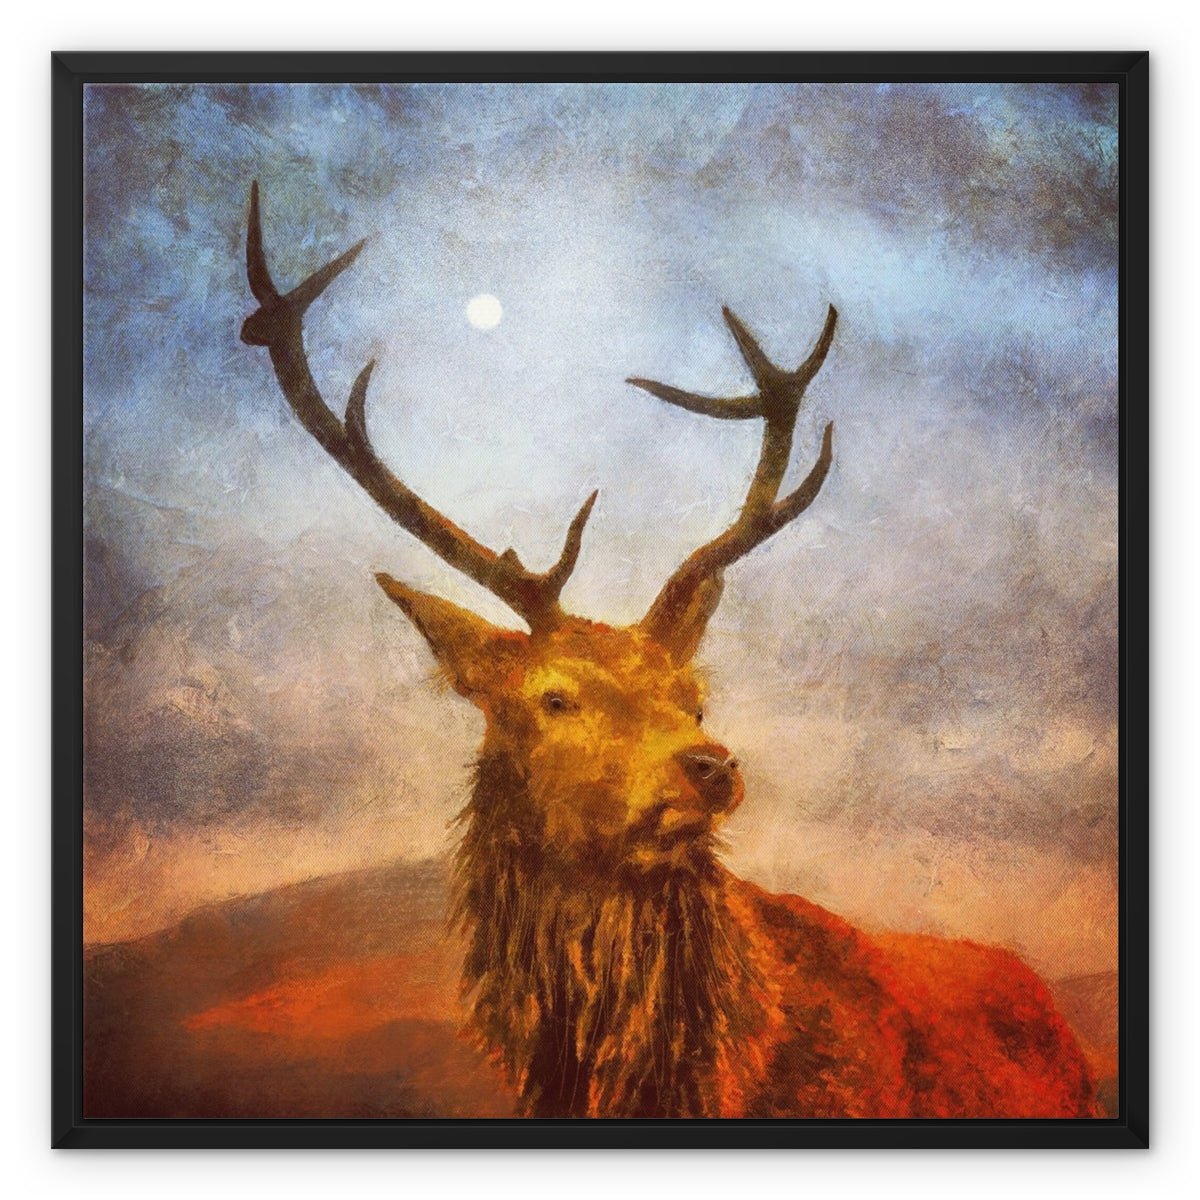 A Moonlit Highland Stag Painting | Framed Canvas-Floating Framed Canvas Prints-Scottish Highlands & Lowlands Art Gallery-24"x24"-Black Frame-Paintings, Prints, Homeware, Art Gifts From Scotland By Scottish Artist Kevin Hunter